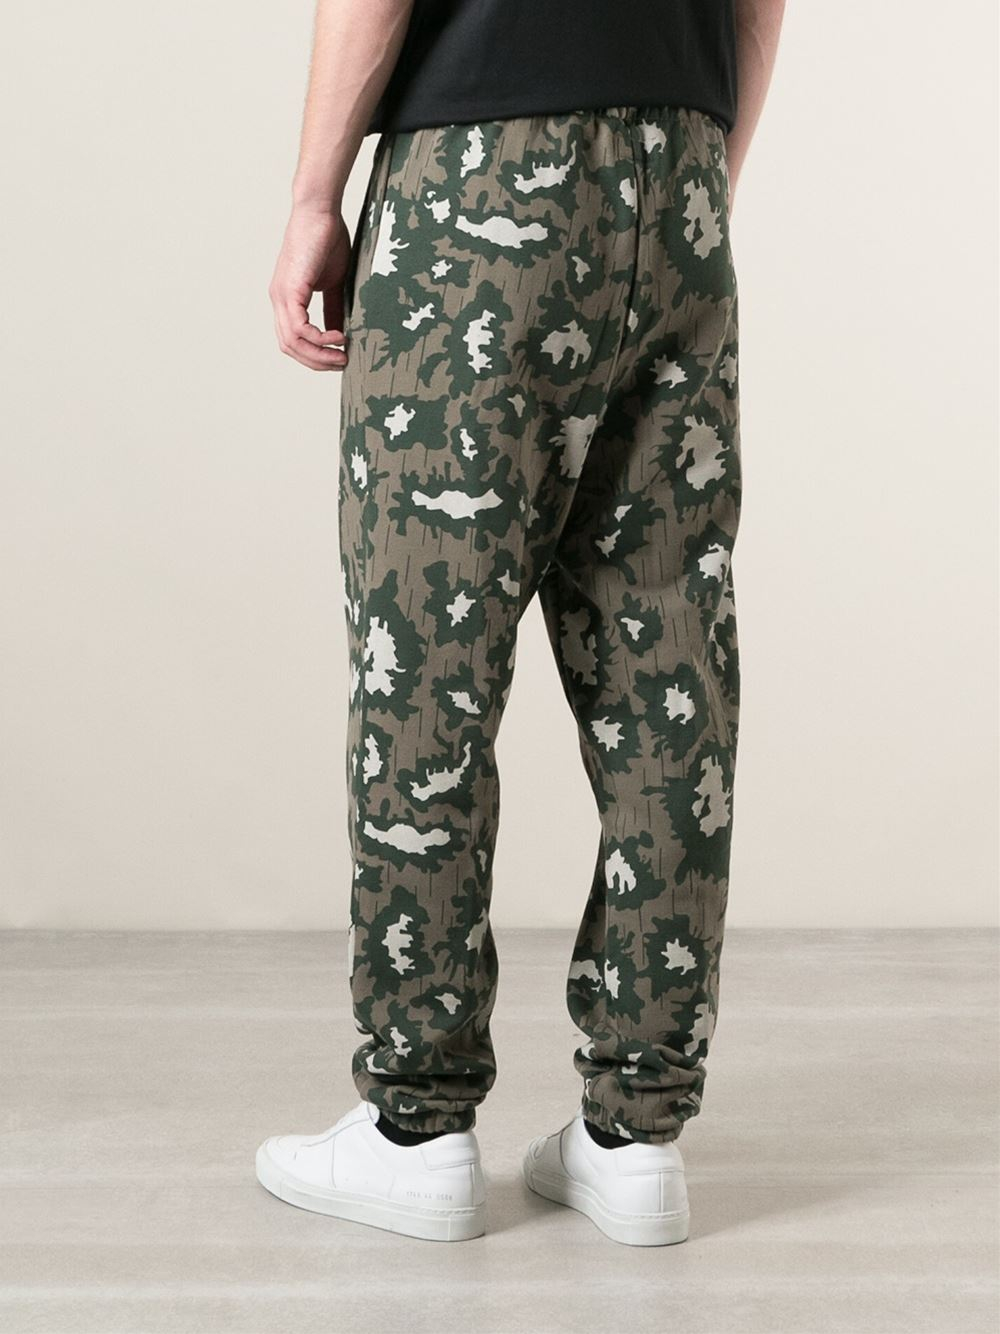 Lyst - Adidas Camouflage Track Pants in Green for Men